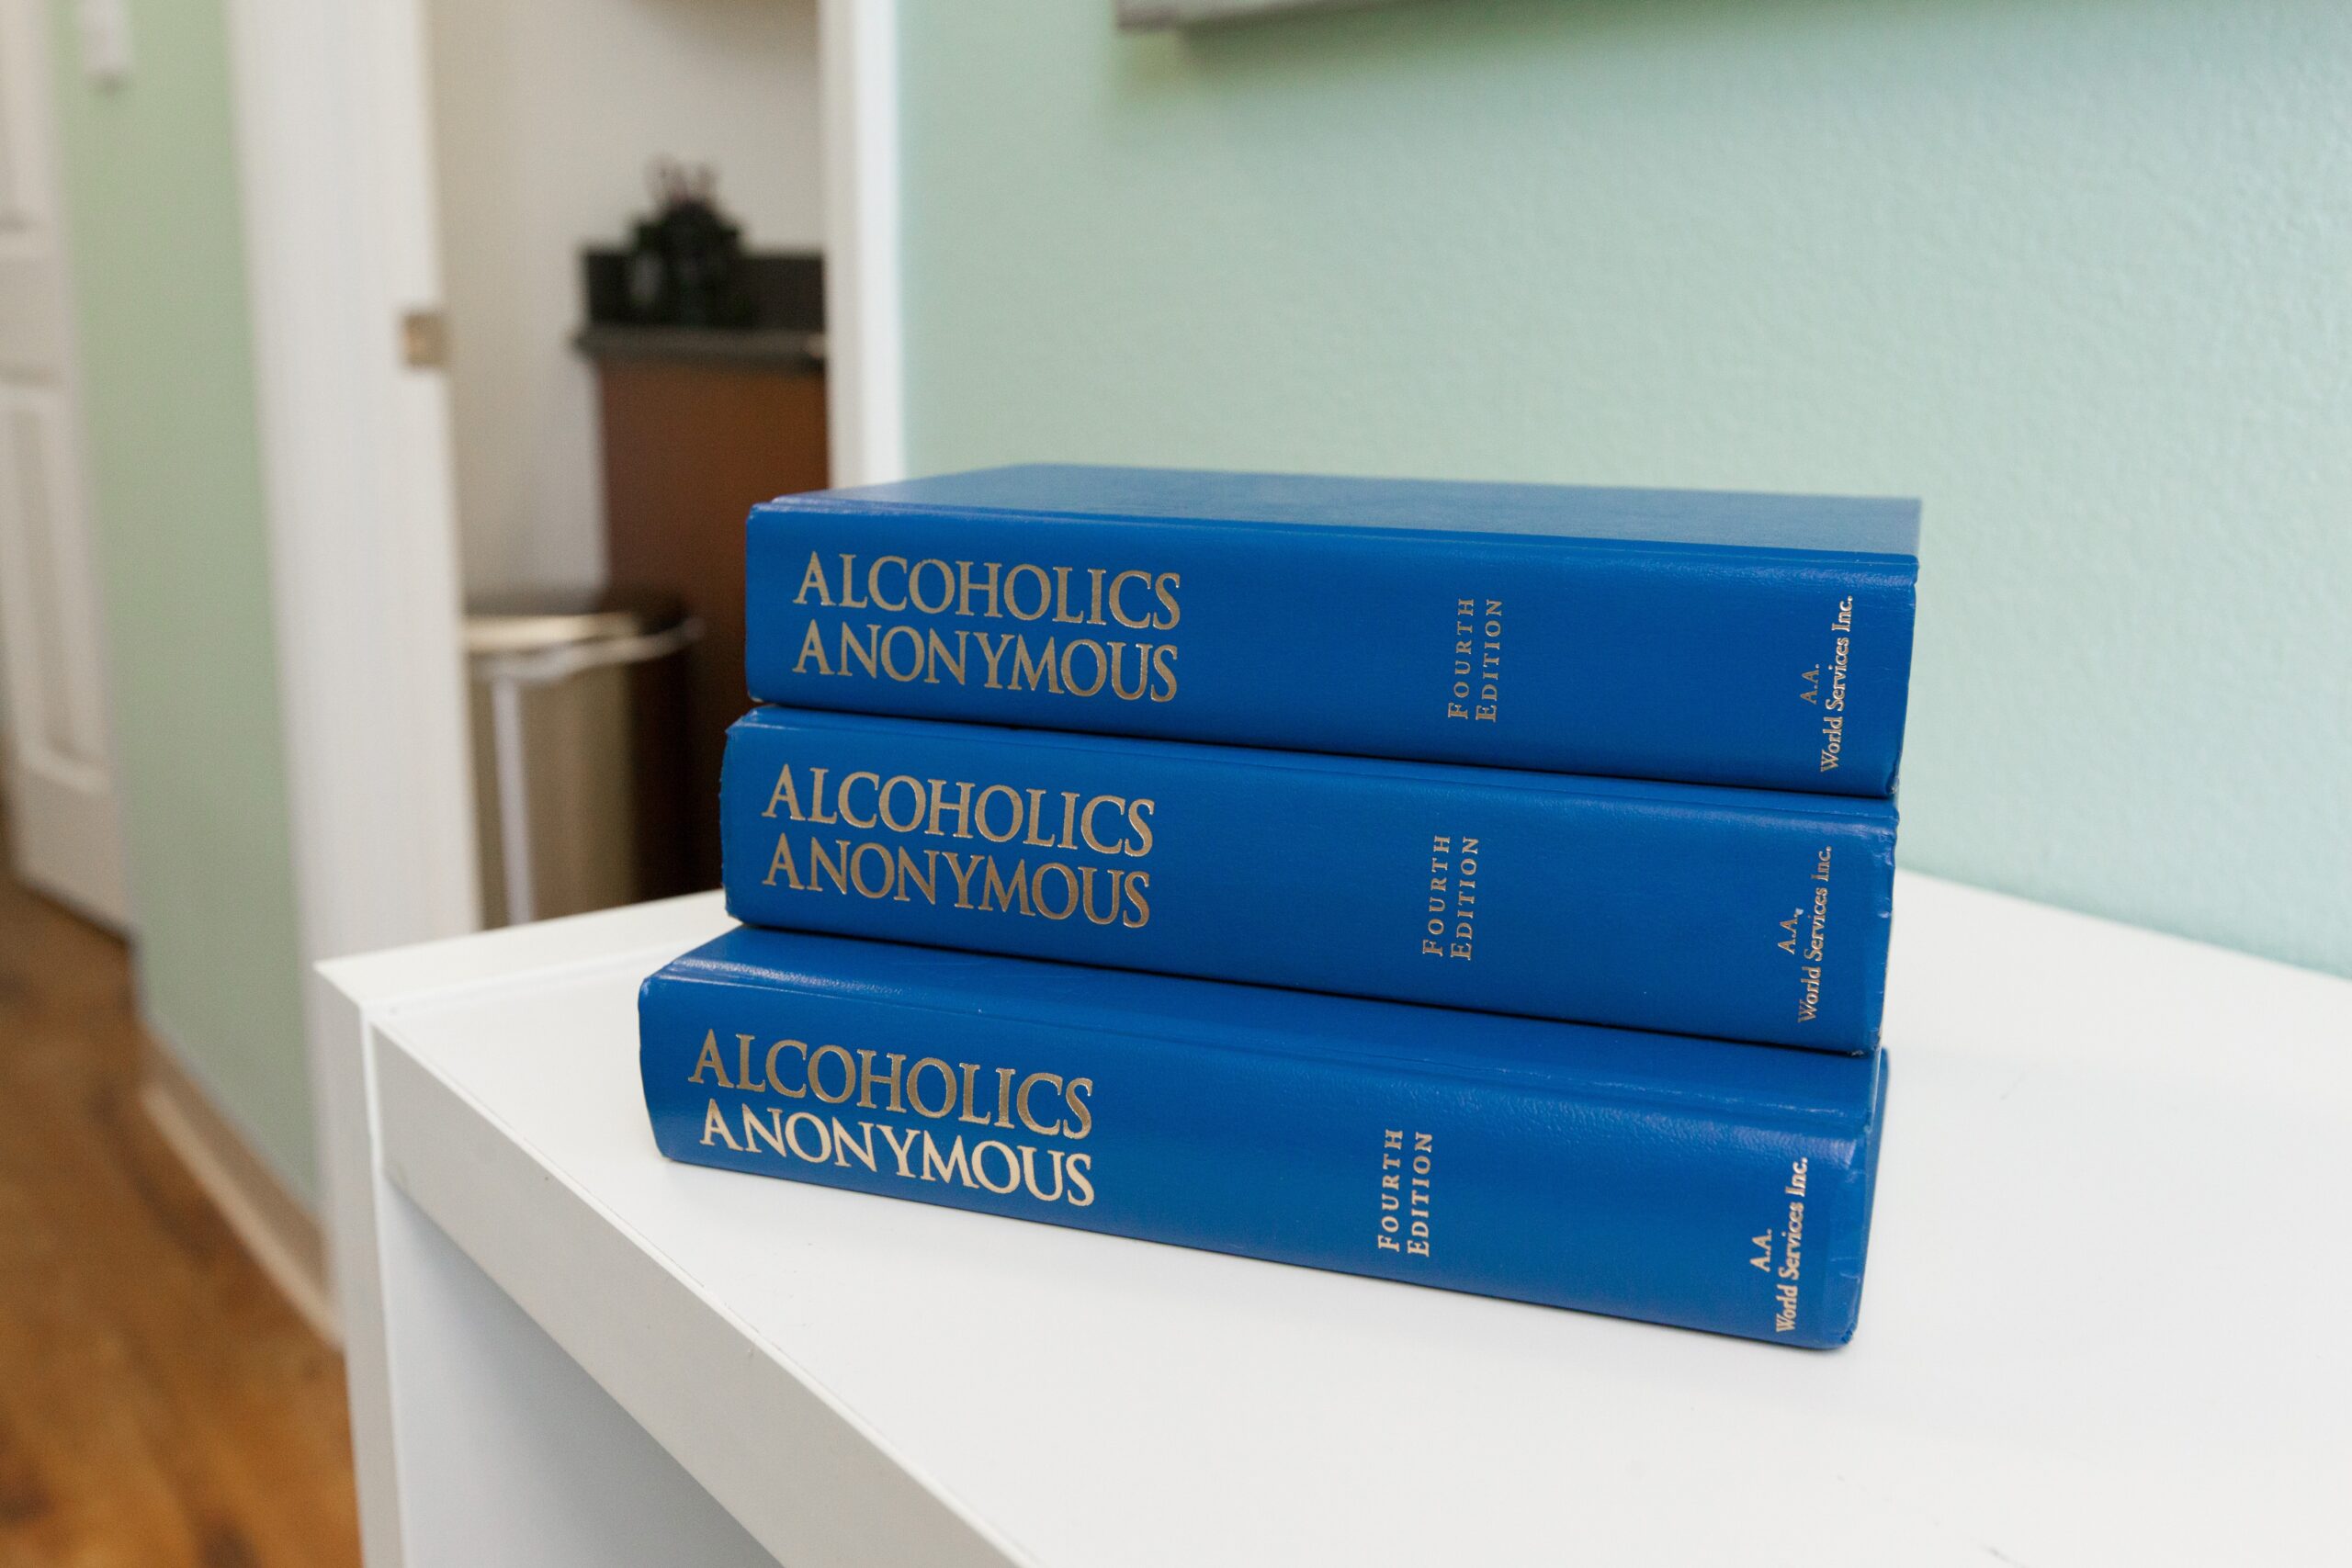 Florida Facilities Alcoholics Anonymous books stacked up